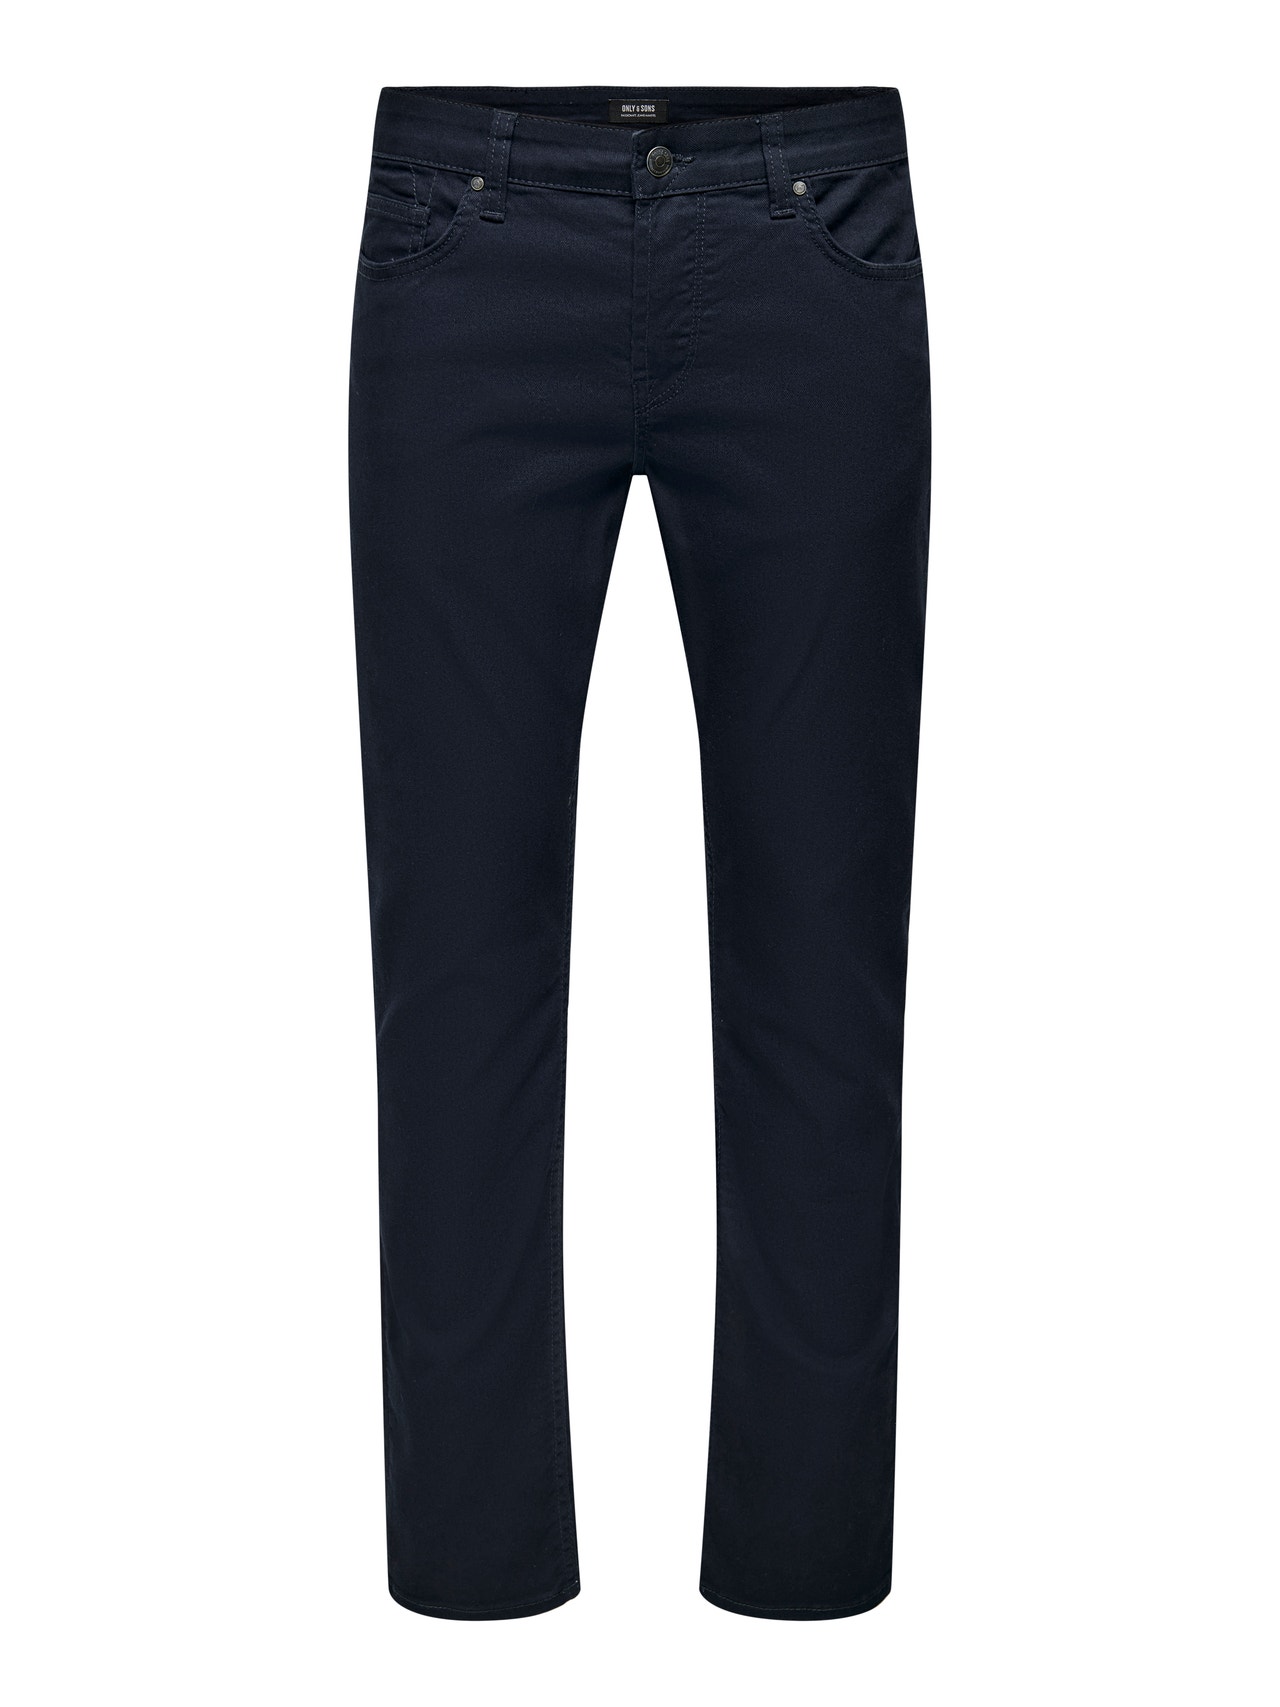 ONLY & SONS Slim Fit Trousers -Navy Blazer - 22024452